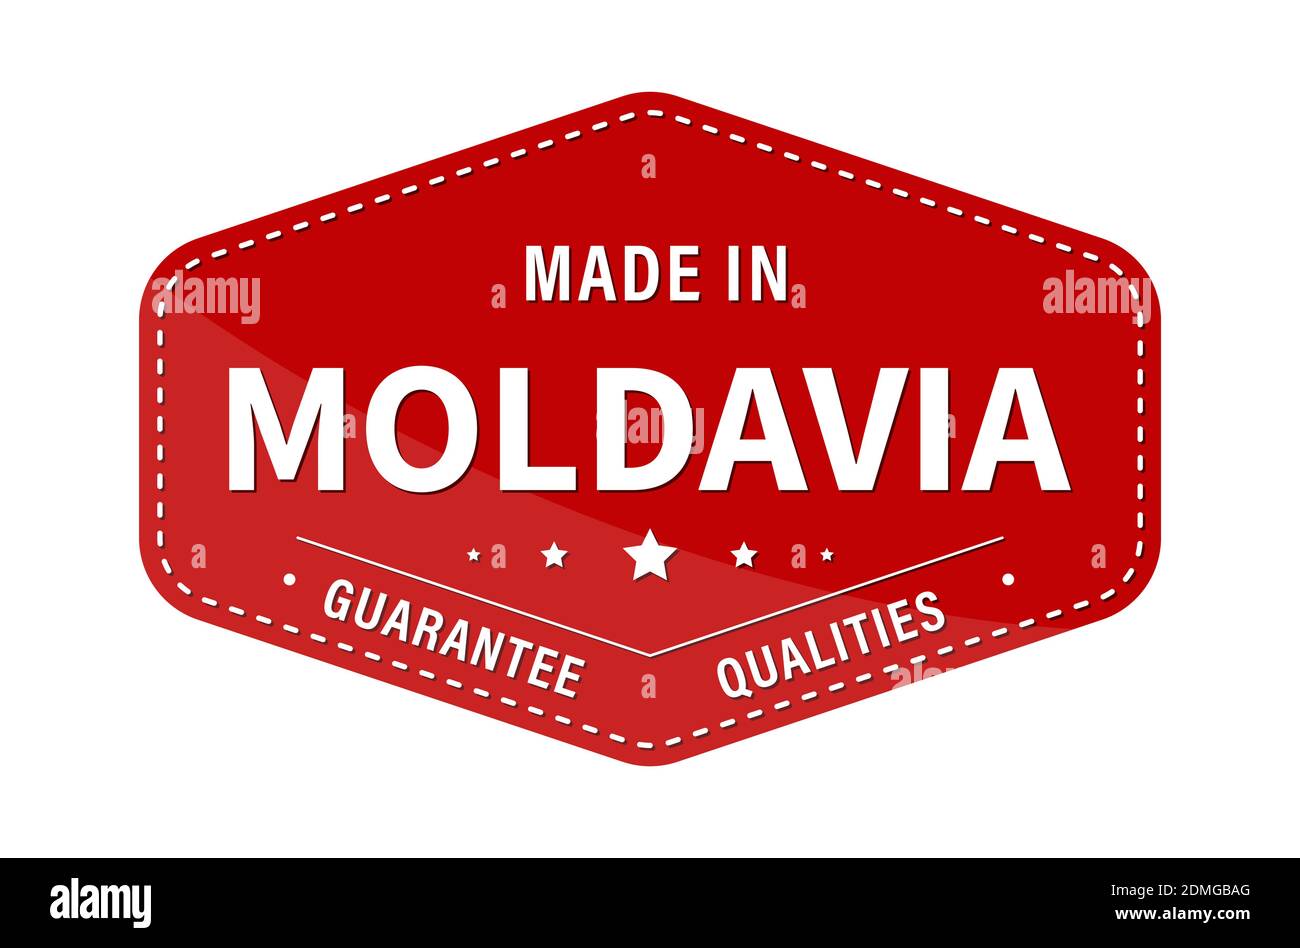 MADE IN MOLDAVIA, guarantee quality. Label, sticker or trademark. Vector illustration. Flat style. Stock Vector